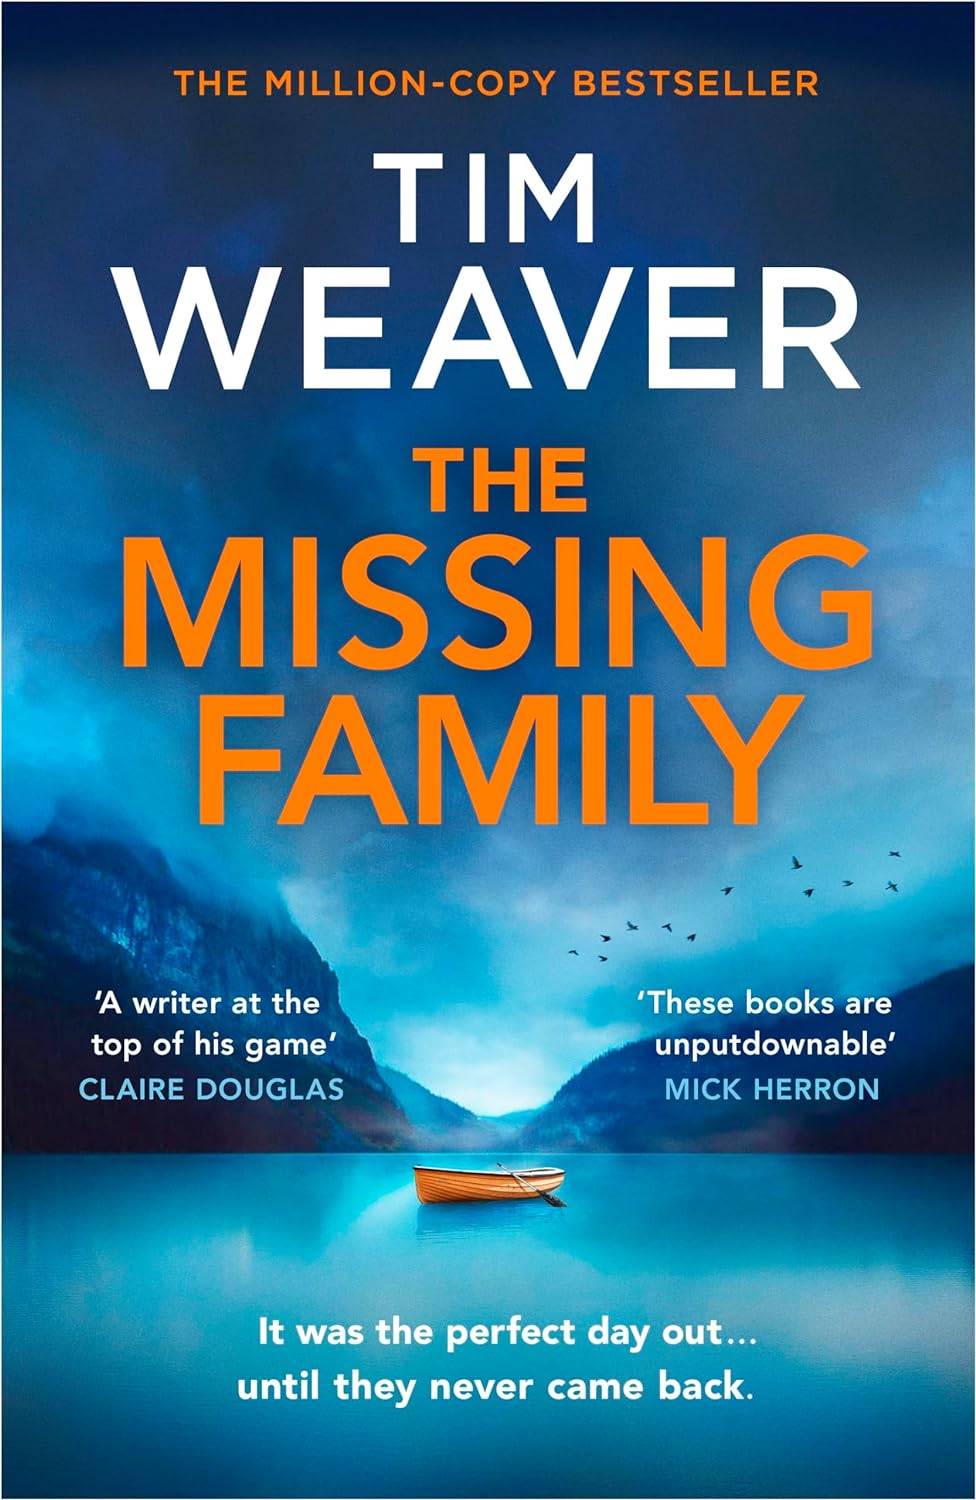 Cover of the Missing Family by Tim Weaver